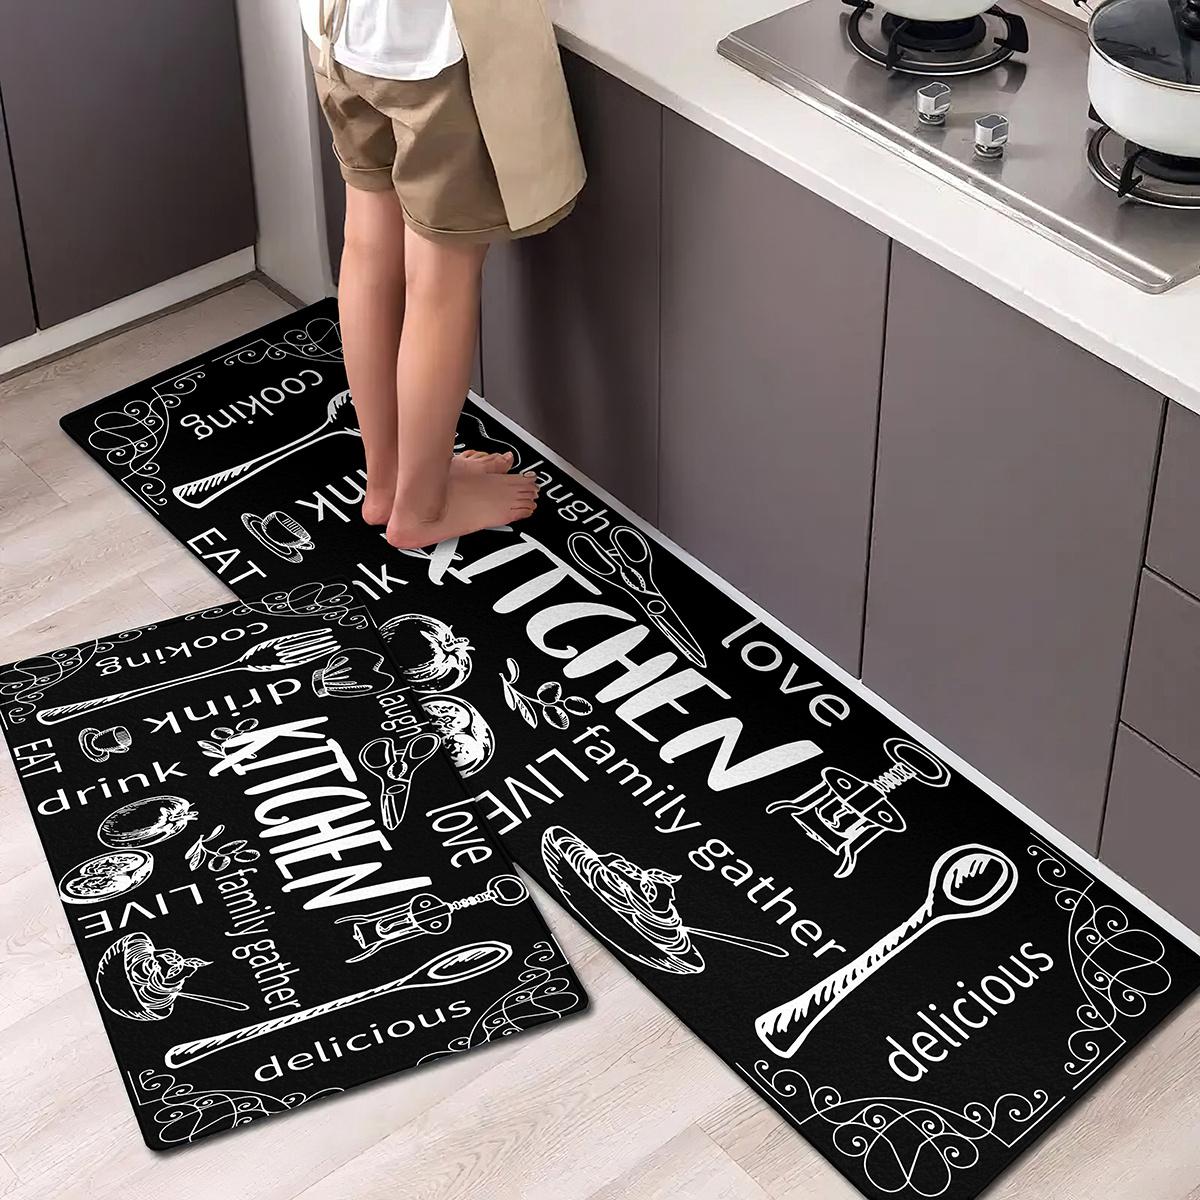 Silicone Mud Soft Kitchen Mat, Non-washable, Water & Oil Absorbent,  Anti-slip, L-shaped Carpet, Dirt-resistant Entrance Mat, Durable & Easy To  Clean